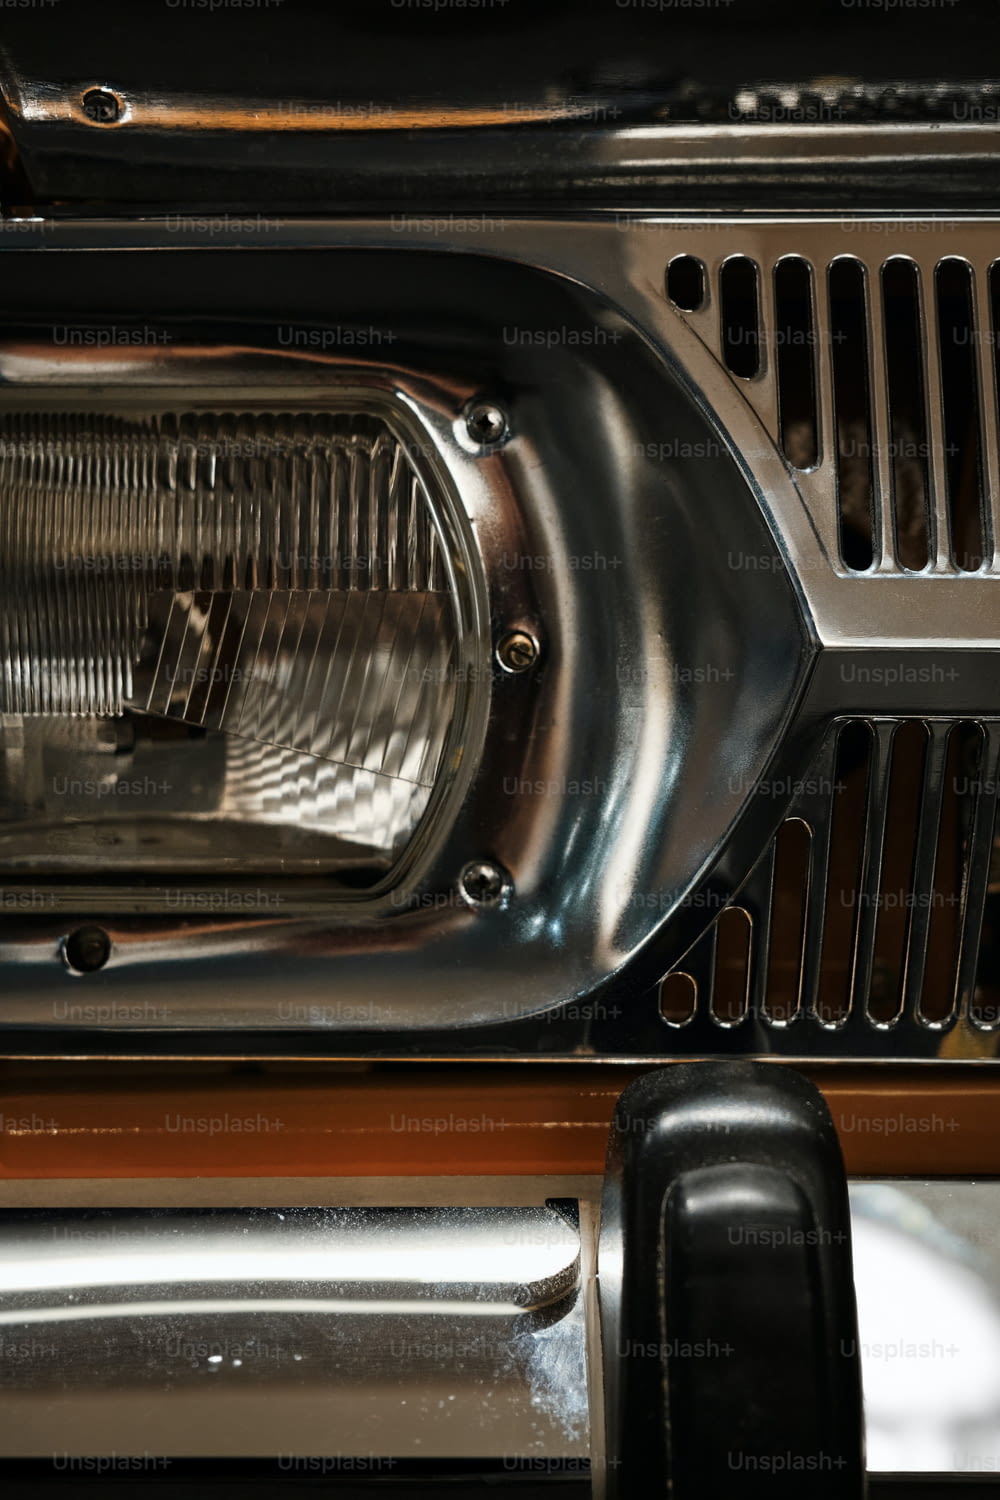 a close up of a grill with a light on